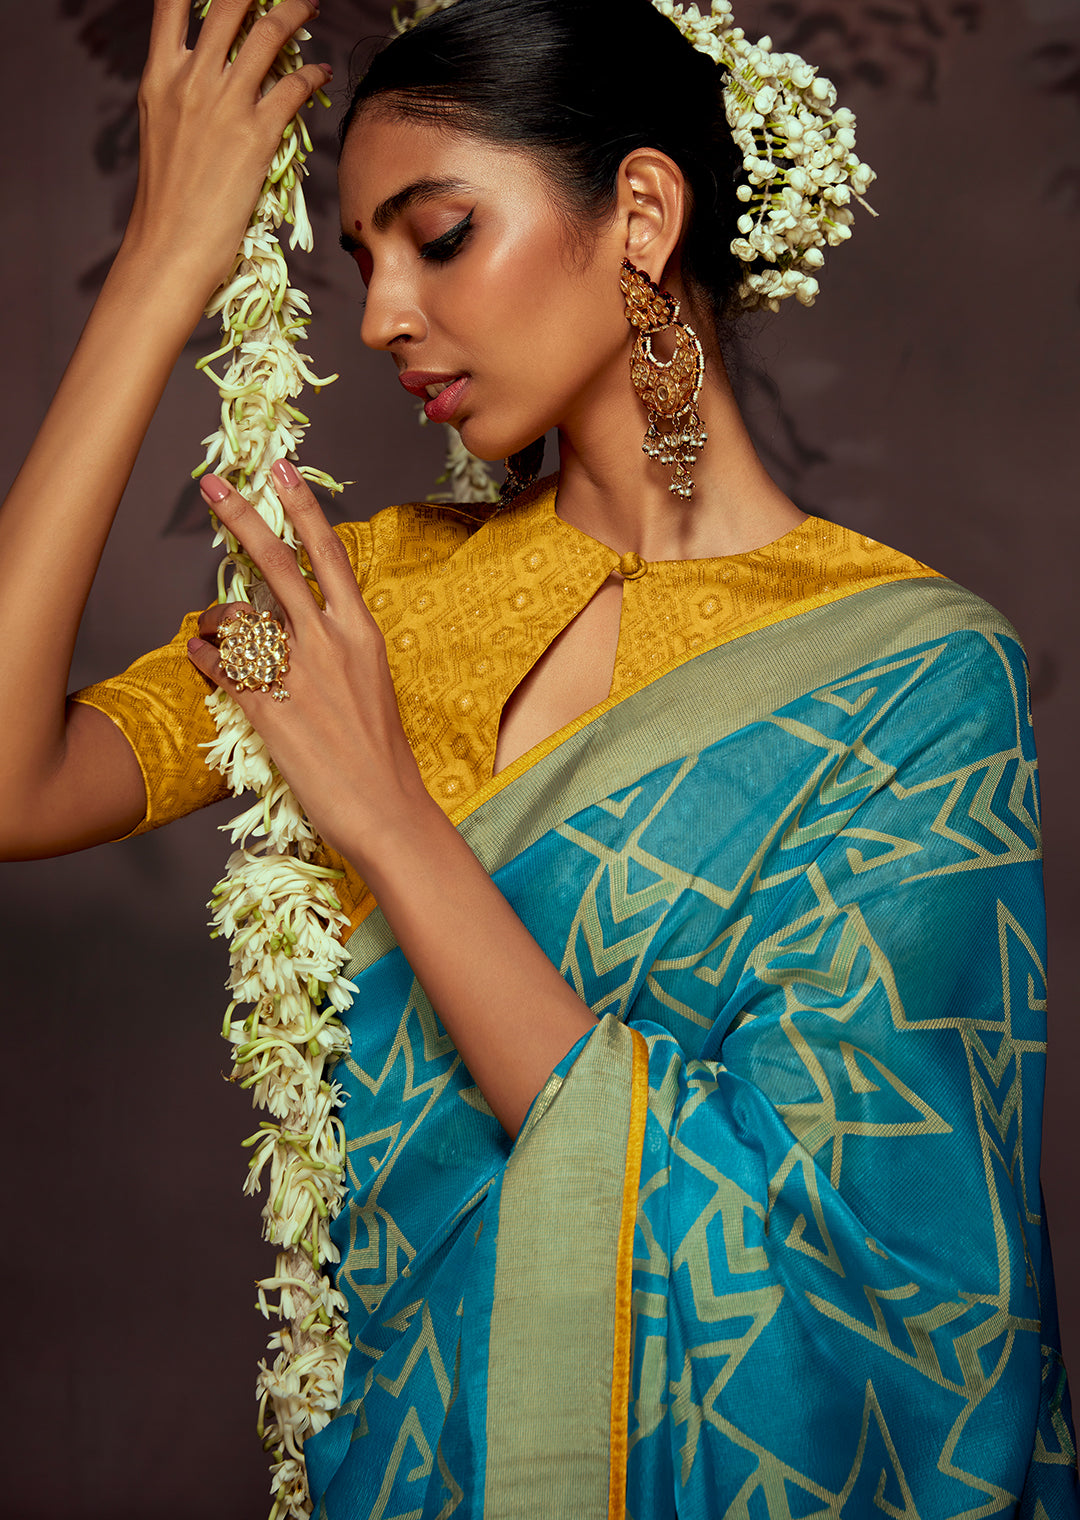 Buy Sleeveless Blouses Collection Online for Lehenga And Saree –  BharatSthali